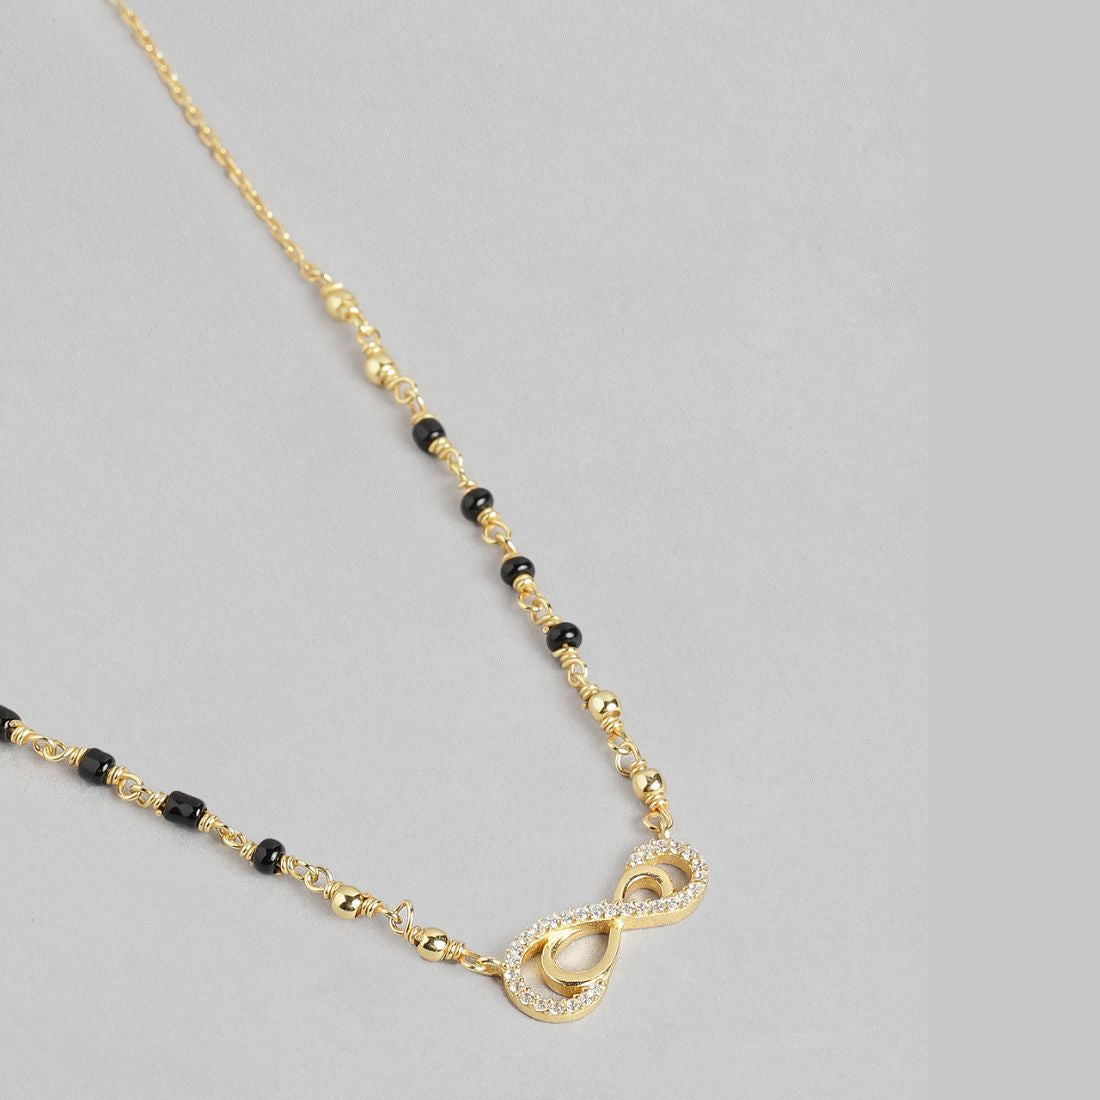 Shimmering Charisma Gold Plated 925 Sterling Silver Mangalsutra